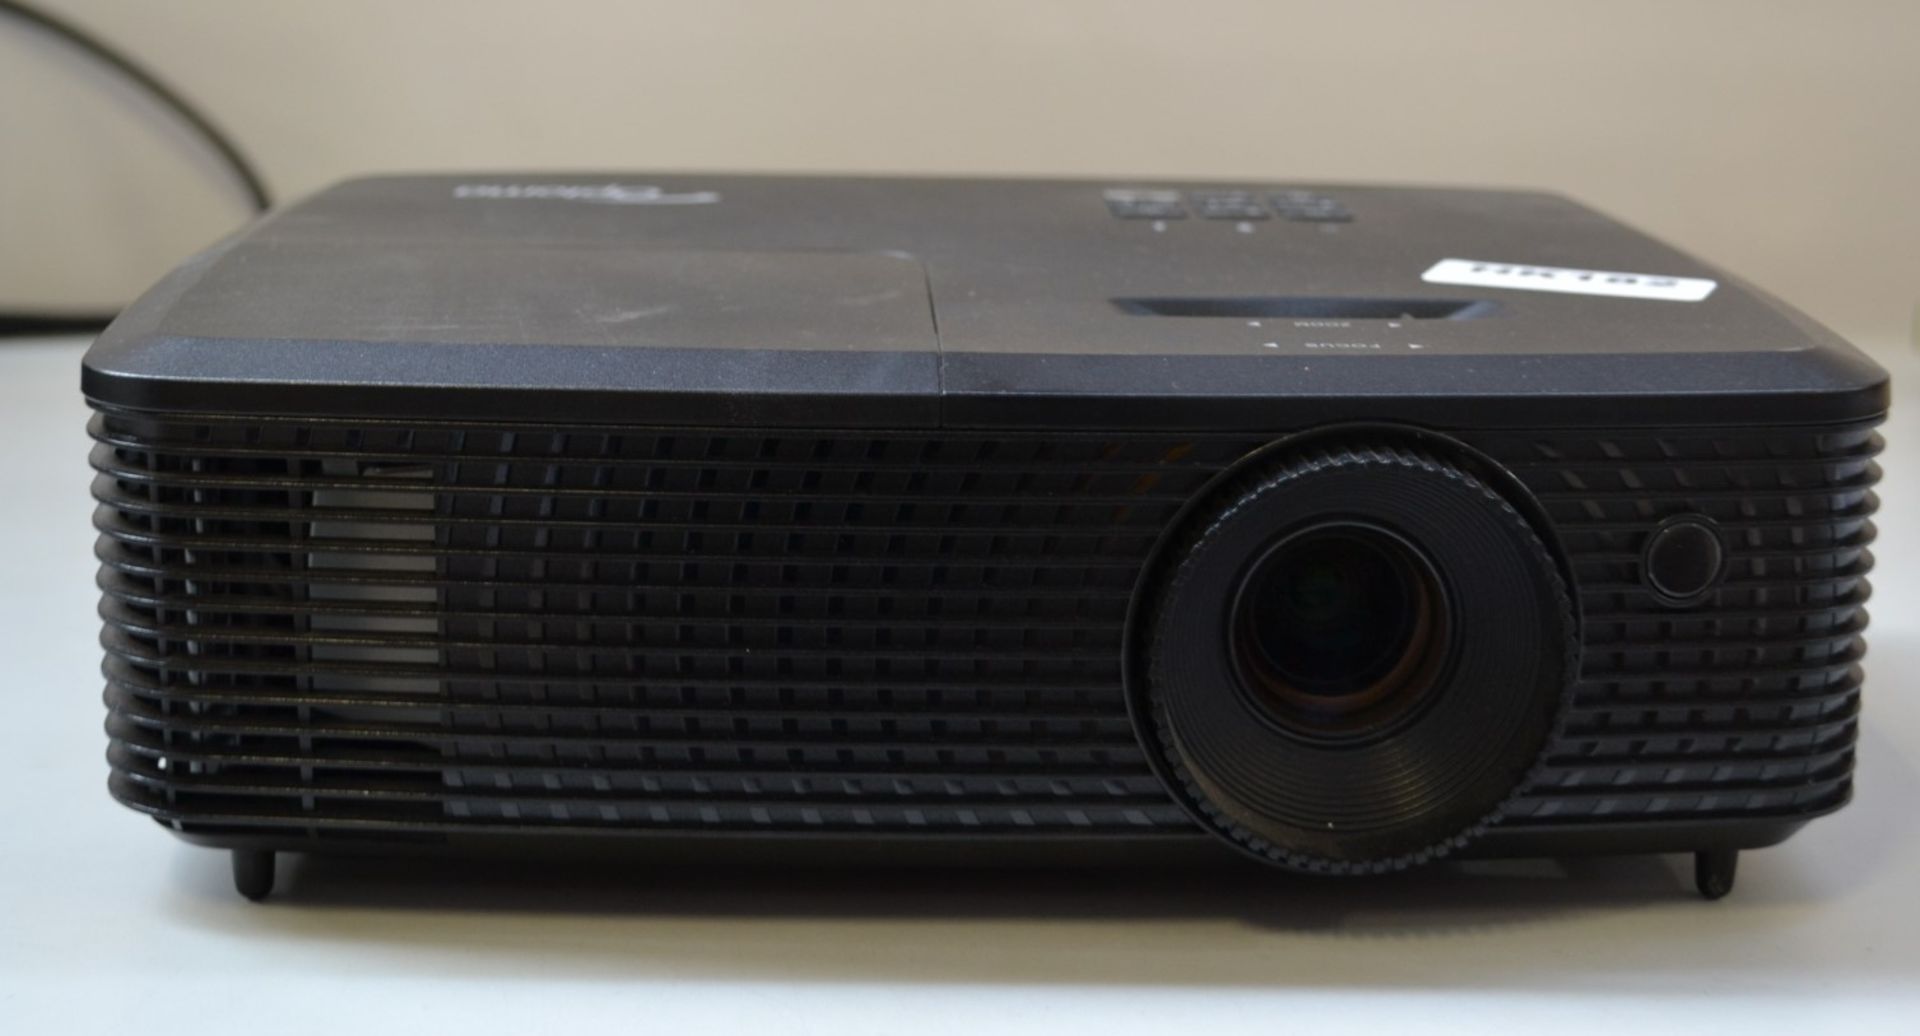 1 x Optoma Projector S331 Black - Ref HK182 - Image 3 of 3